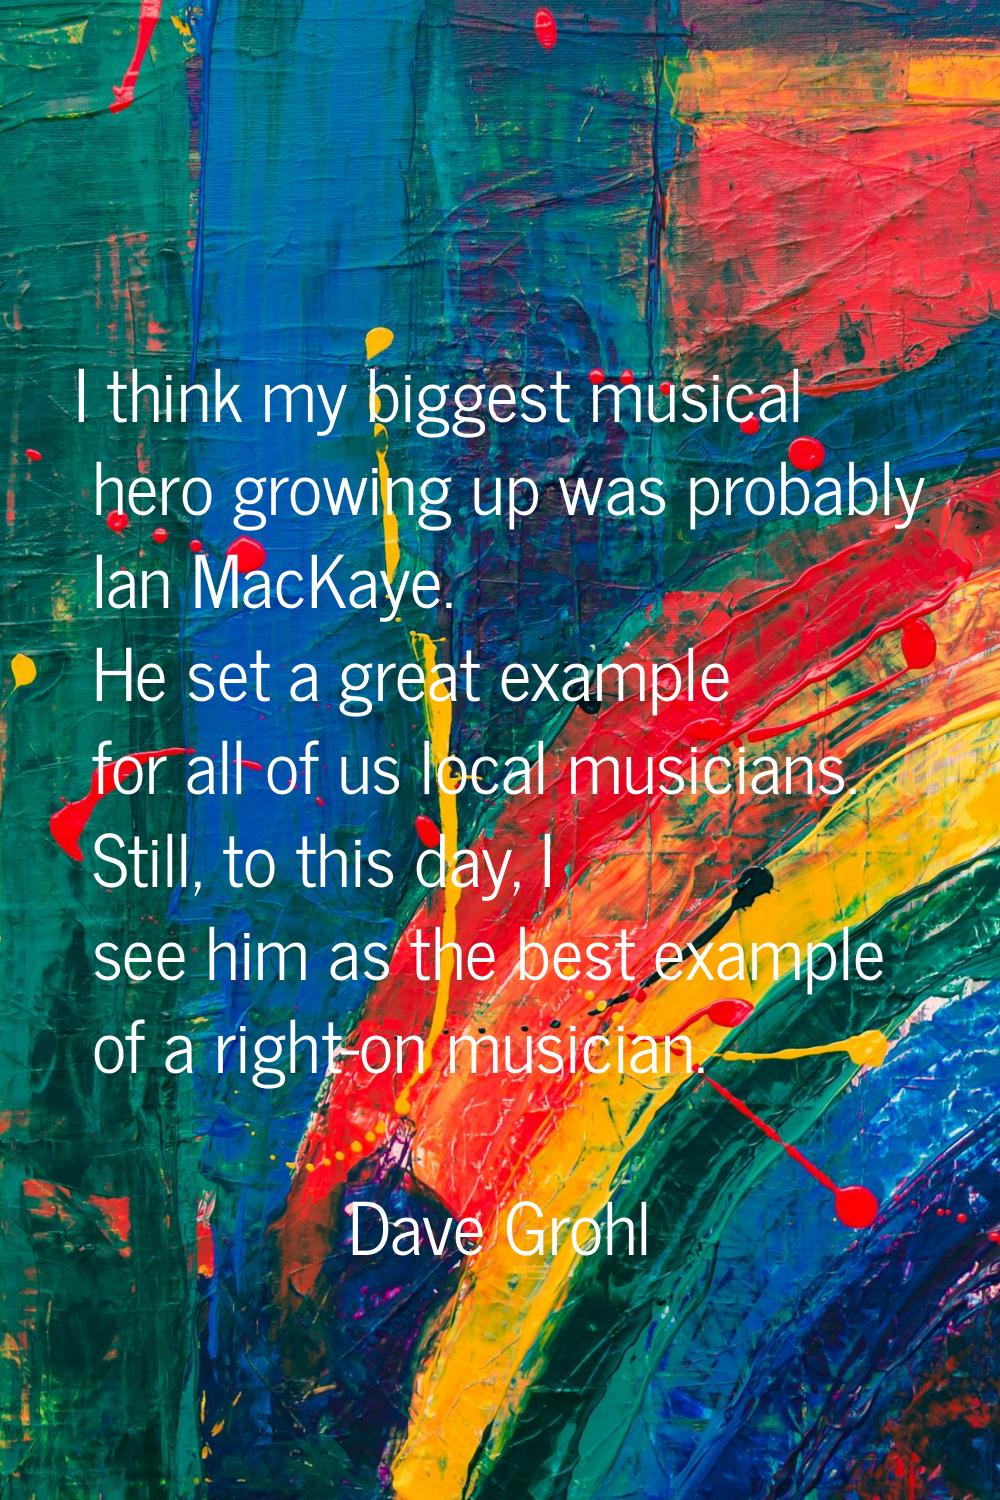 I think my biggest musical hero growing up was probably Ian MacKaye. He set a great example for all